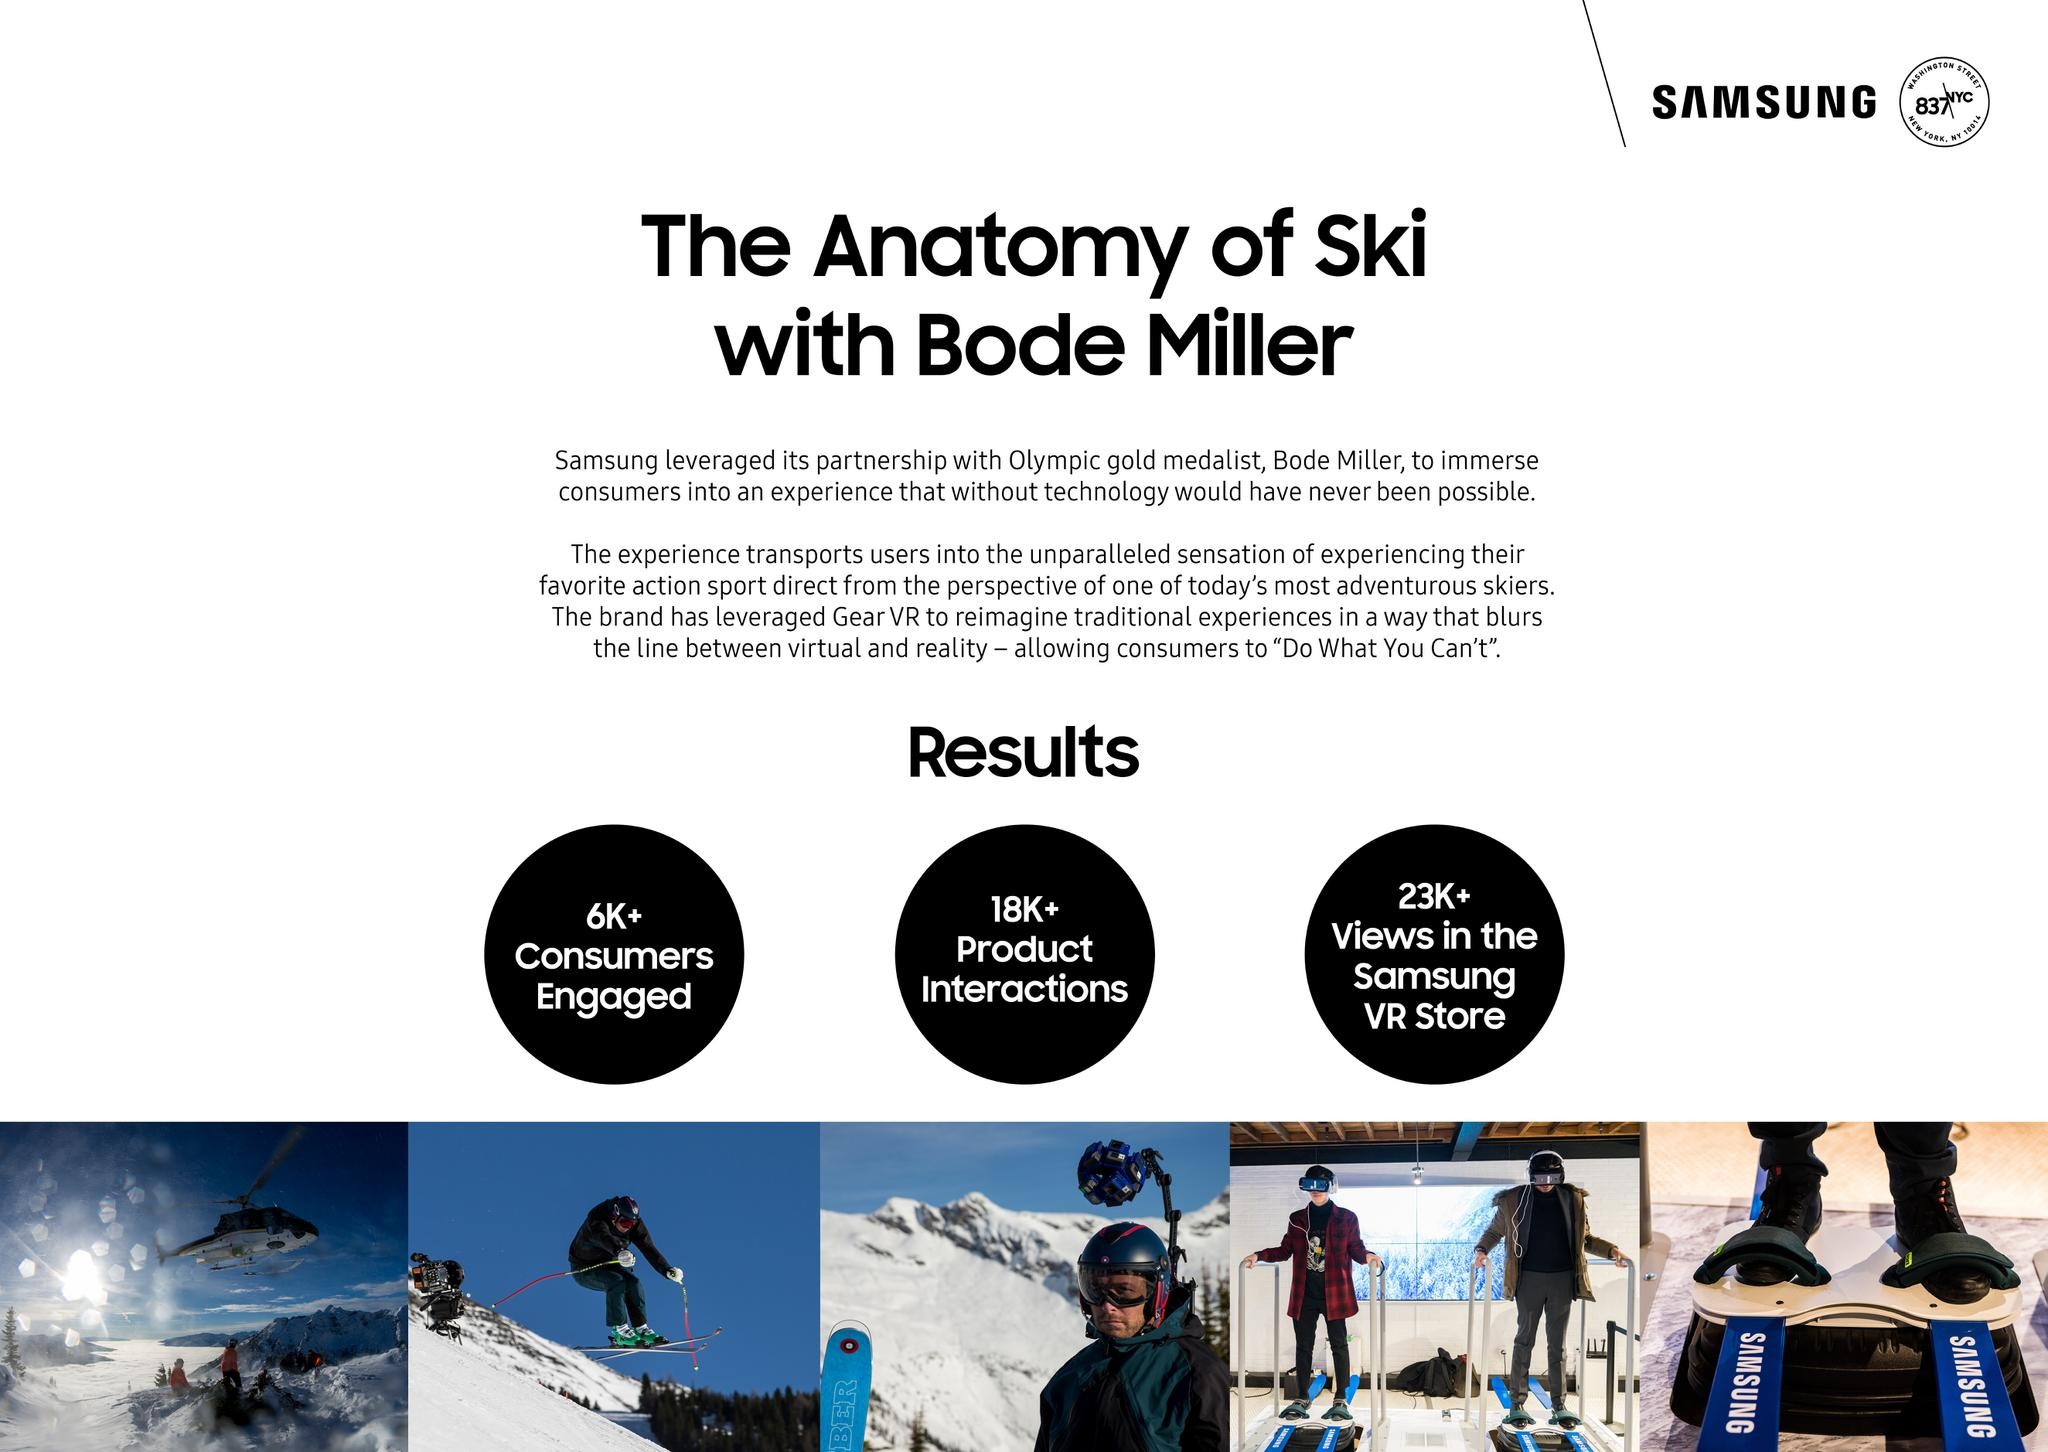 The Anatomy of Ski with Bode Miller